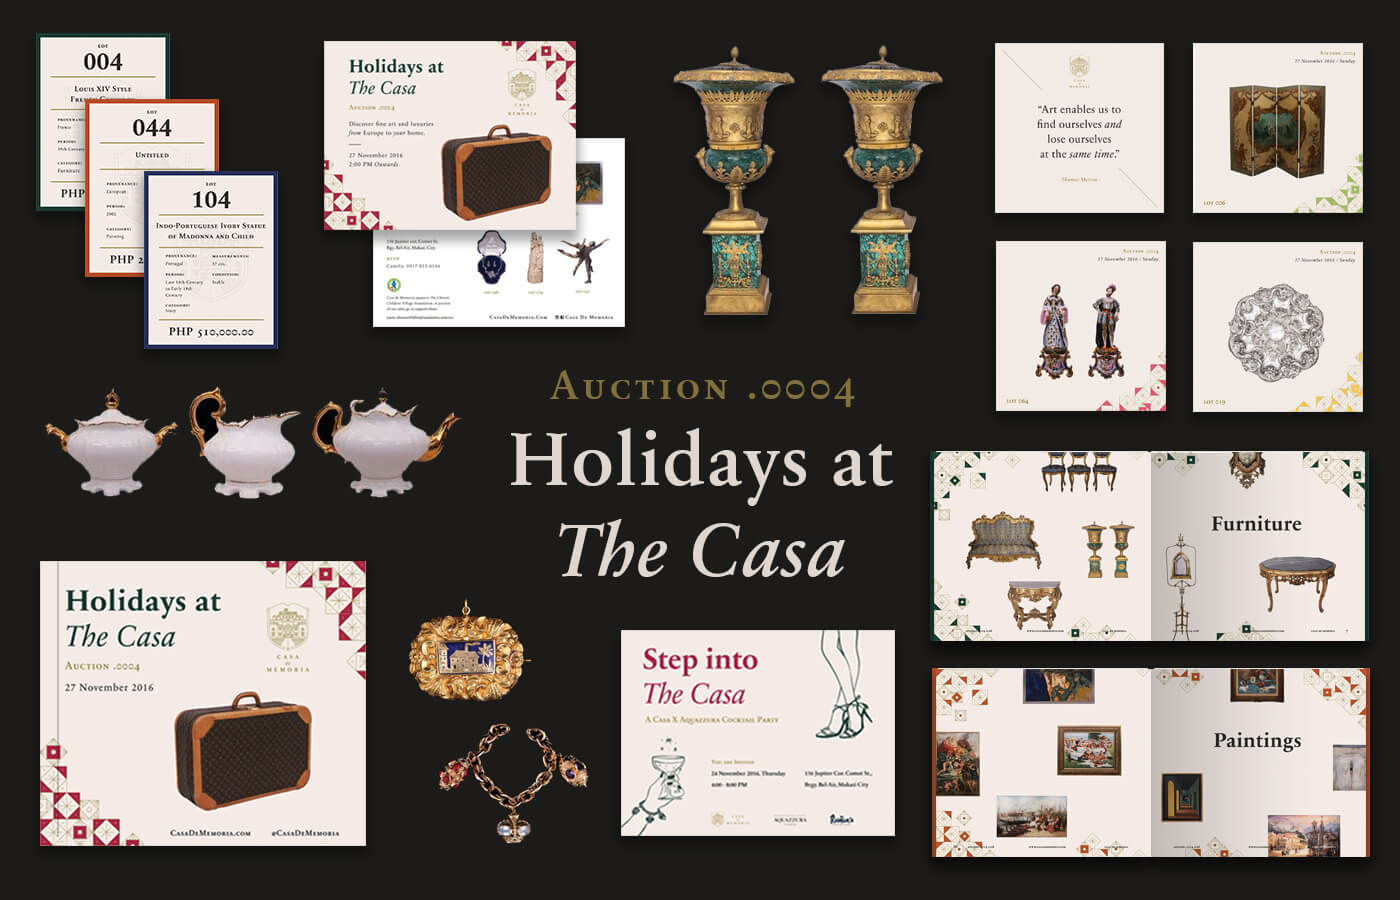 Campaign branding and collaterals designed for Holidays at the Casa Auction for Casa de Memoria